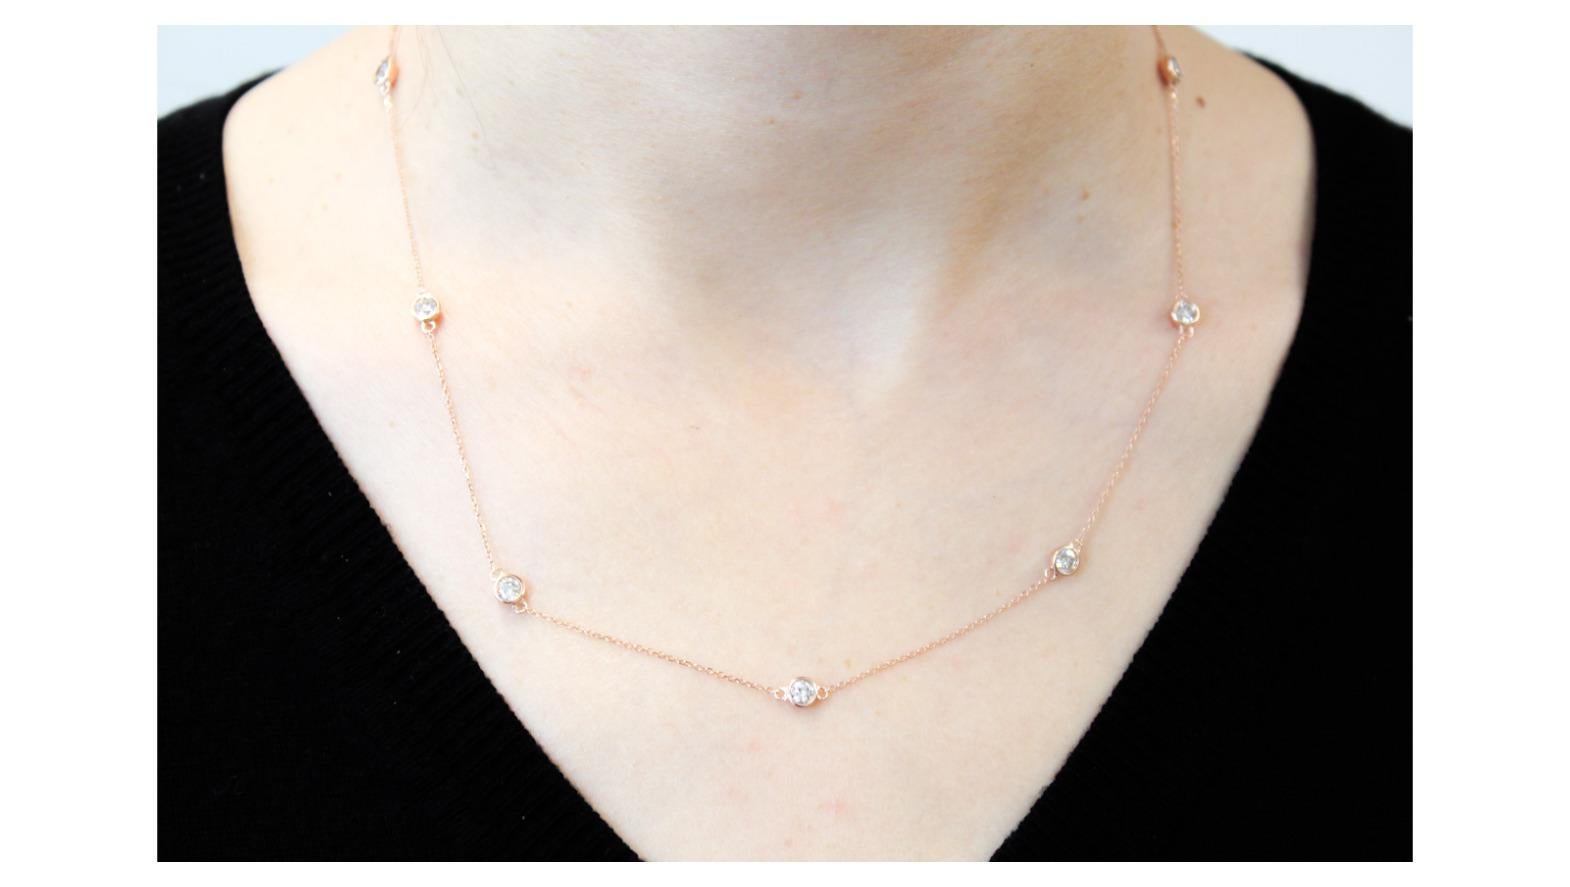 A gorgeous diamond necklace will rarely go overlooked. This 18” piece is both rare and stunning. It includes bezels that set white round diamonds. There are 10 white diamonds that total 1.50 and are I-J color and I1/I2 clarity. This versatile